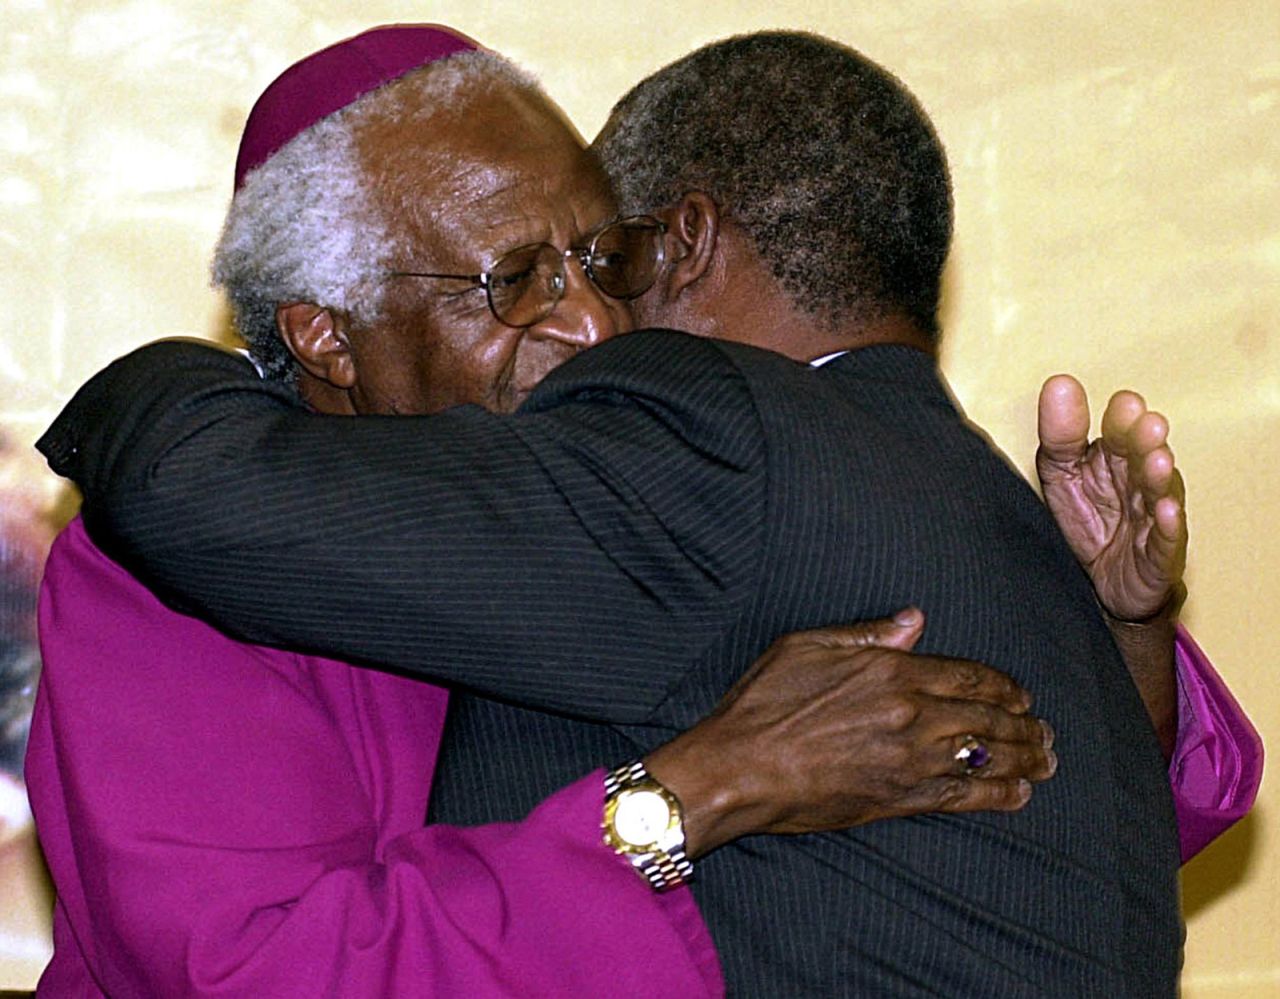 Tutu hugs South African President Thabo Mbeki after turning over the Truth and Reconciliation Report in 2003. Tutu chaired the commission that produced the report.